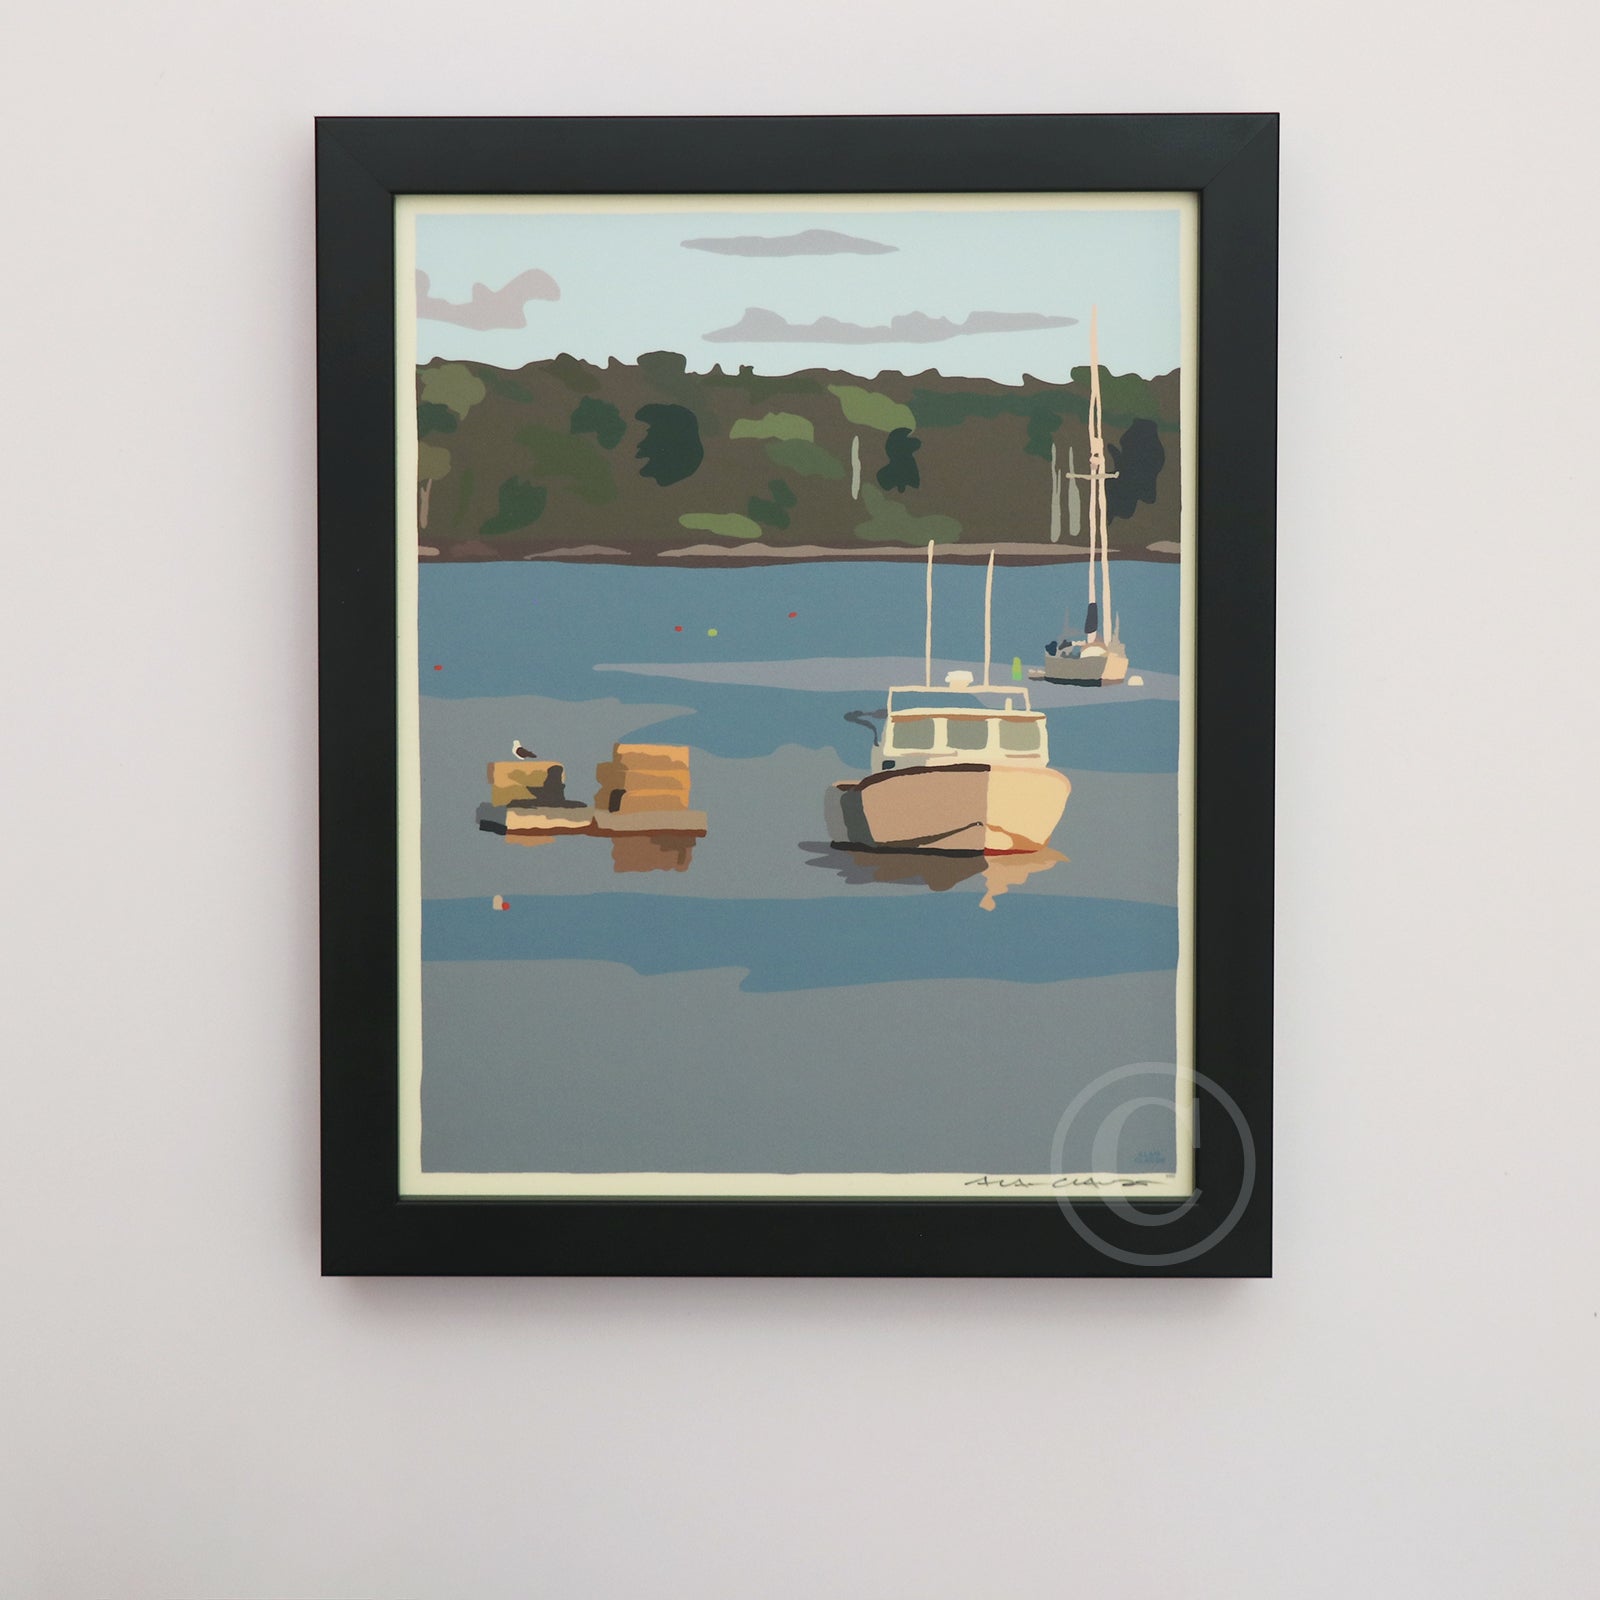 Lobster Boat in Round Pond Harbor Art Print Harbor 8" x 10" Vertical Framed Wall Poster By Alan Claude - Maine